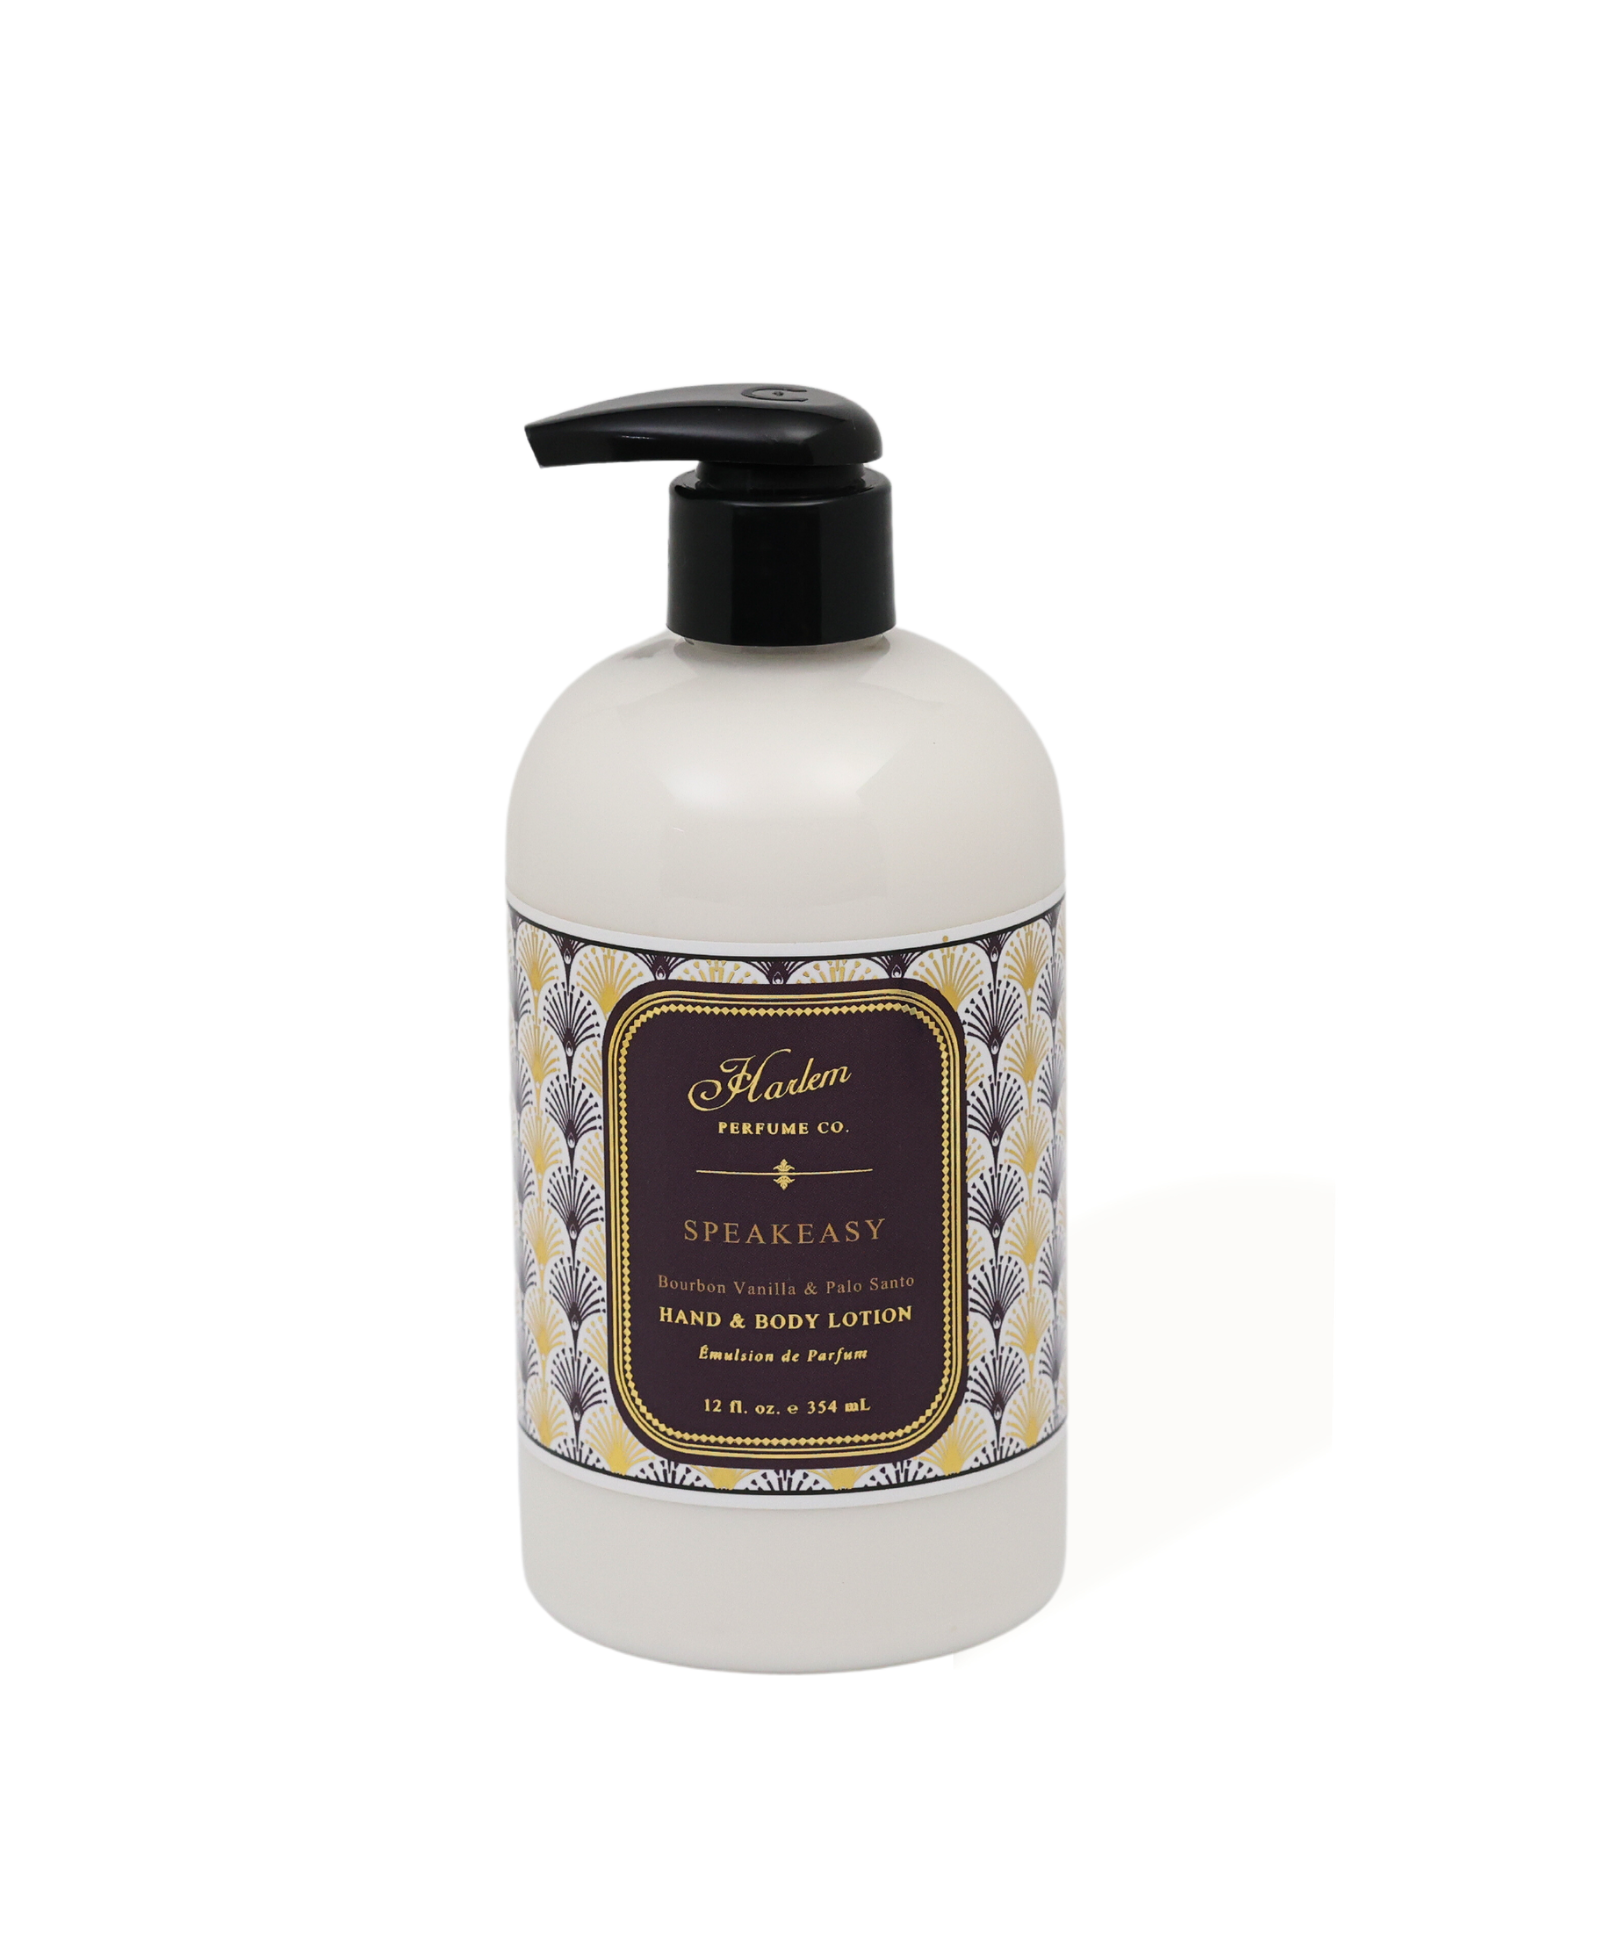 This is an image of our Speakeasy Lotion in a clear PET plastic bottle with a decorative label with an art deco pattern.